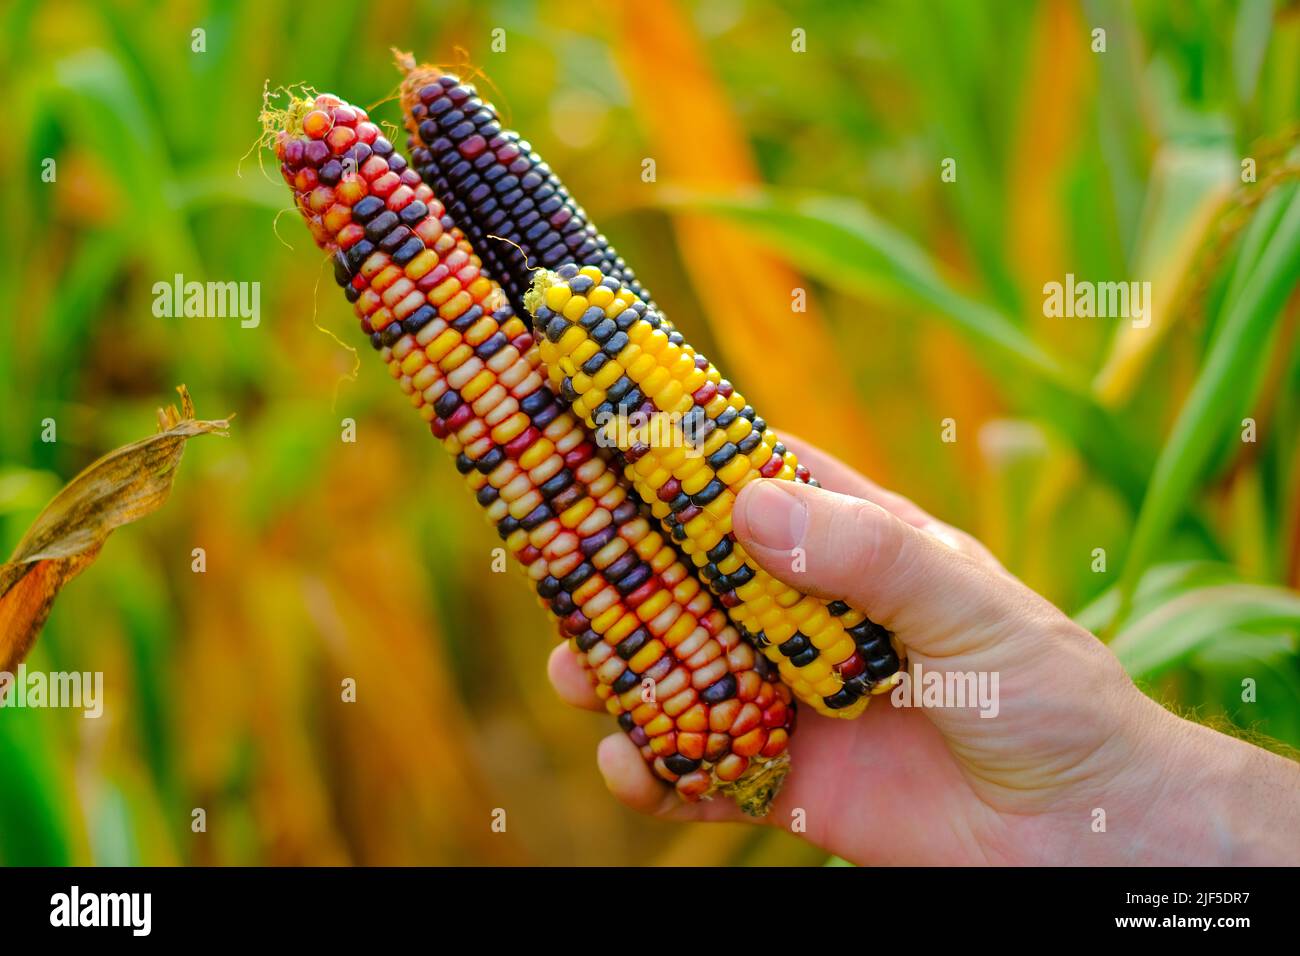 Corn harvest.colorful corn. Cobs of multicolored corn in hands on field background.farmer in a corn field harvests. food security  Stock Photo